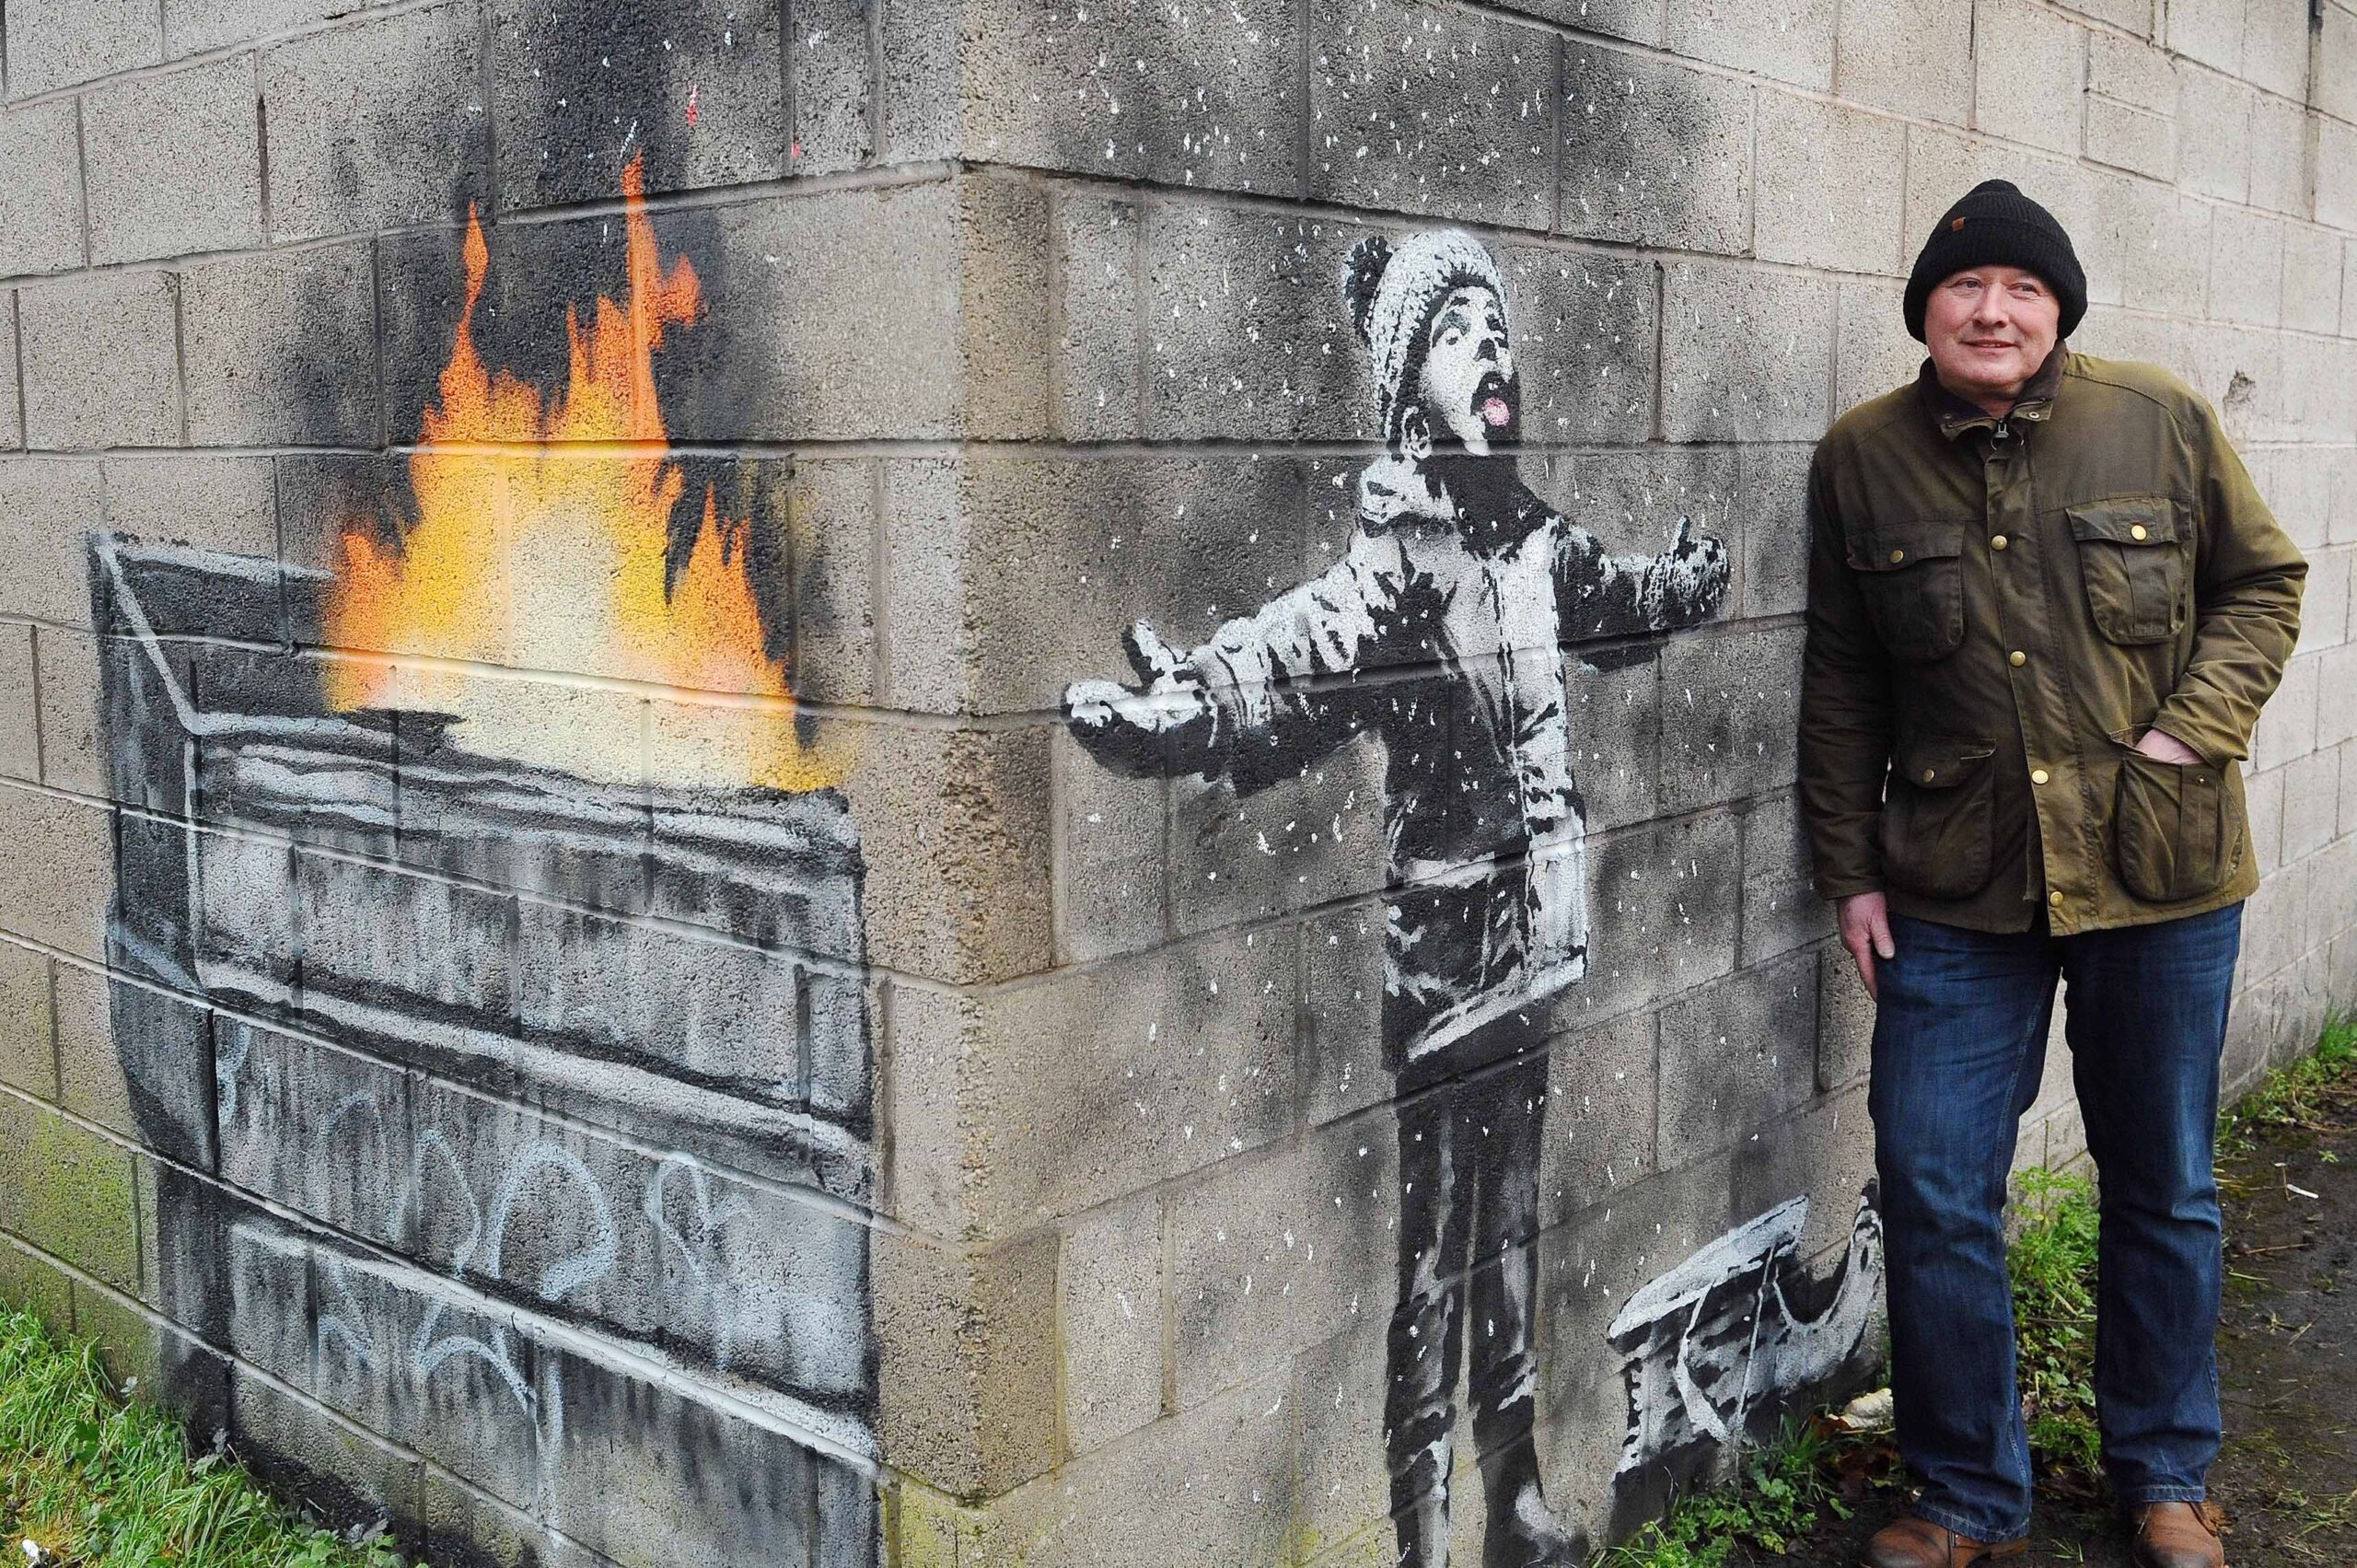 Ian said that the mural 'turned political' when locals felt it was an insult to the town